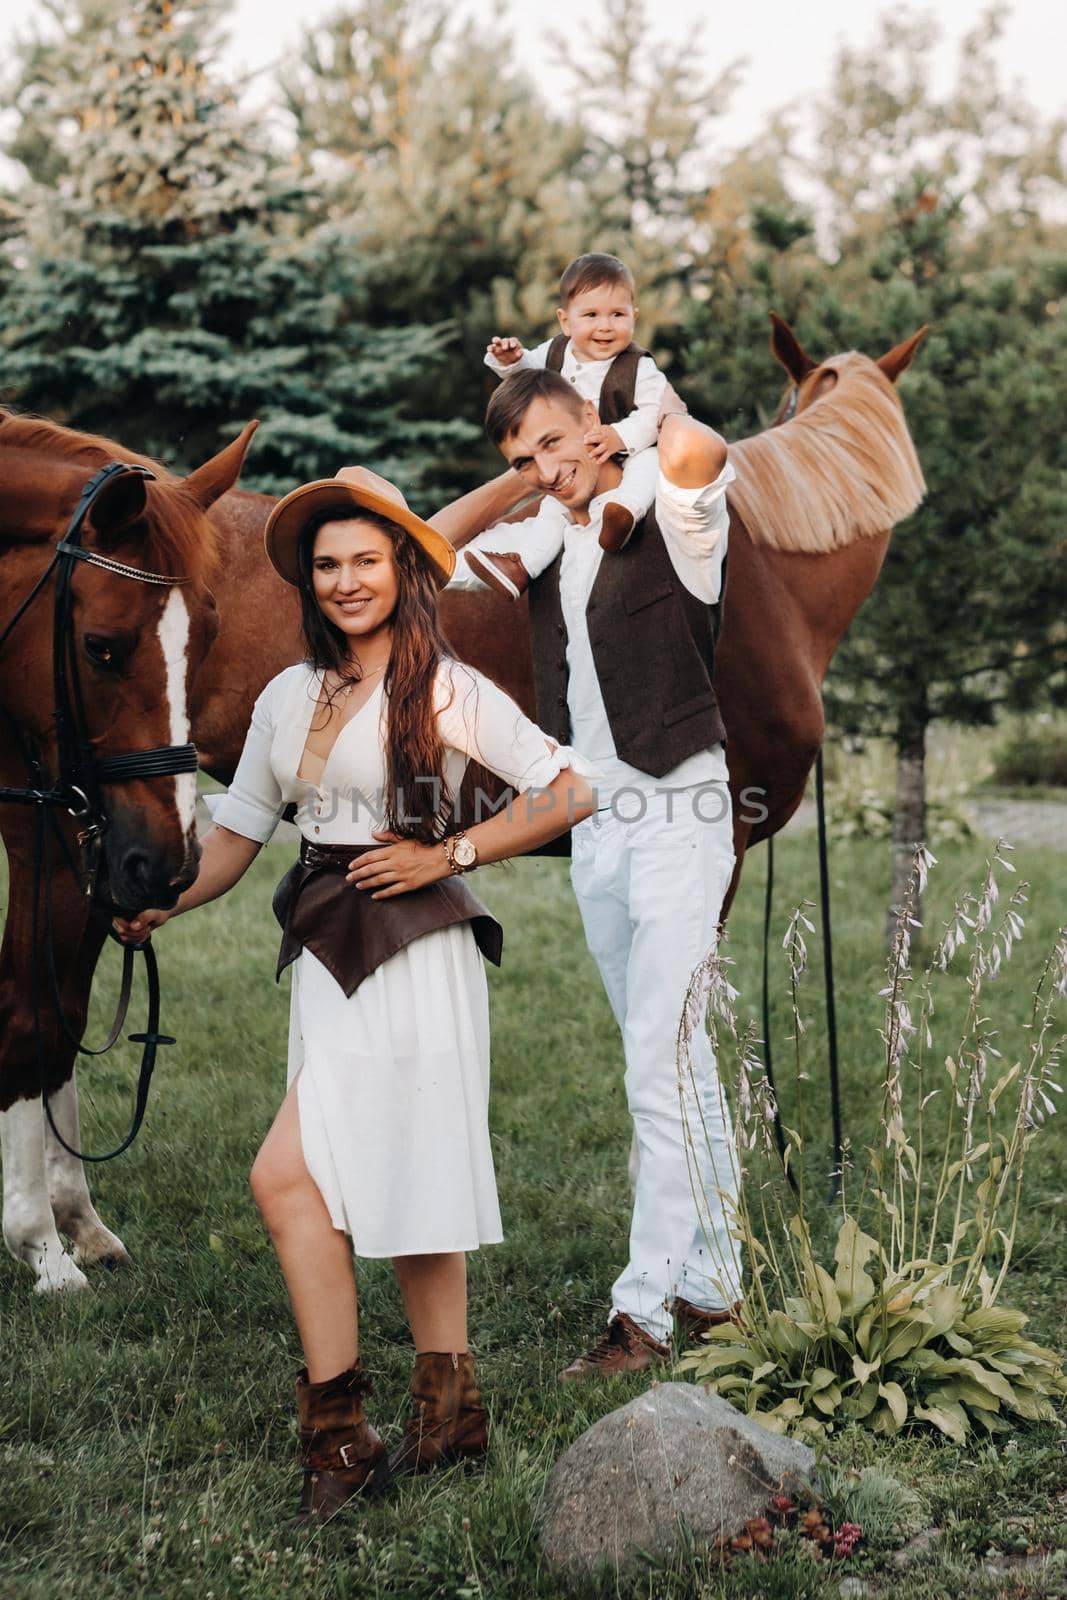 A family in white clothes with their son stand near two beautiful horses in nature. A stylish couple with a child are photographed with horses.